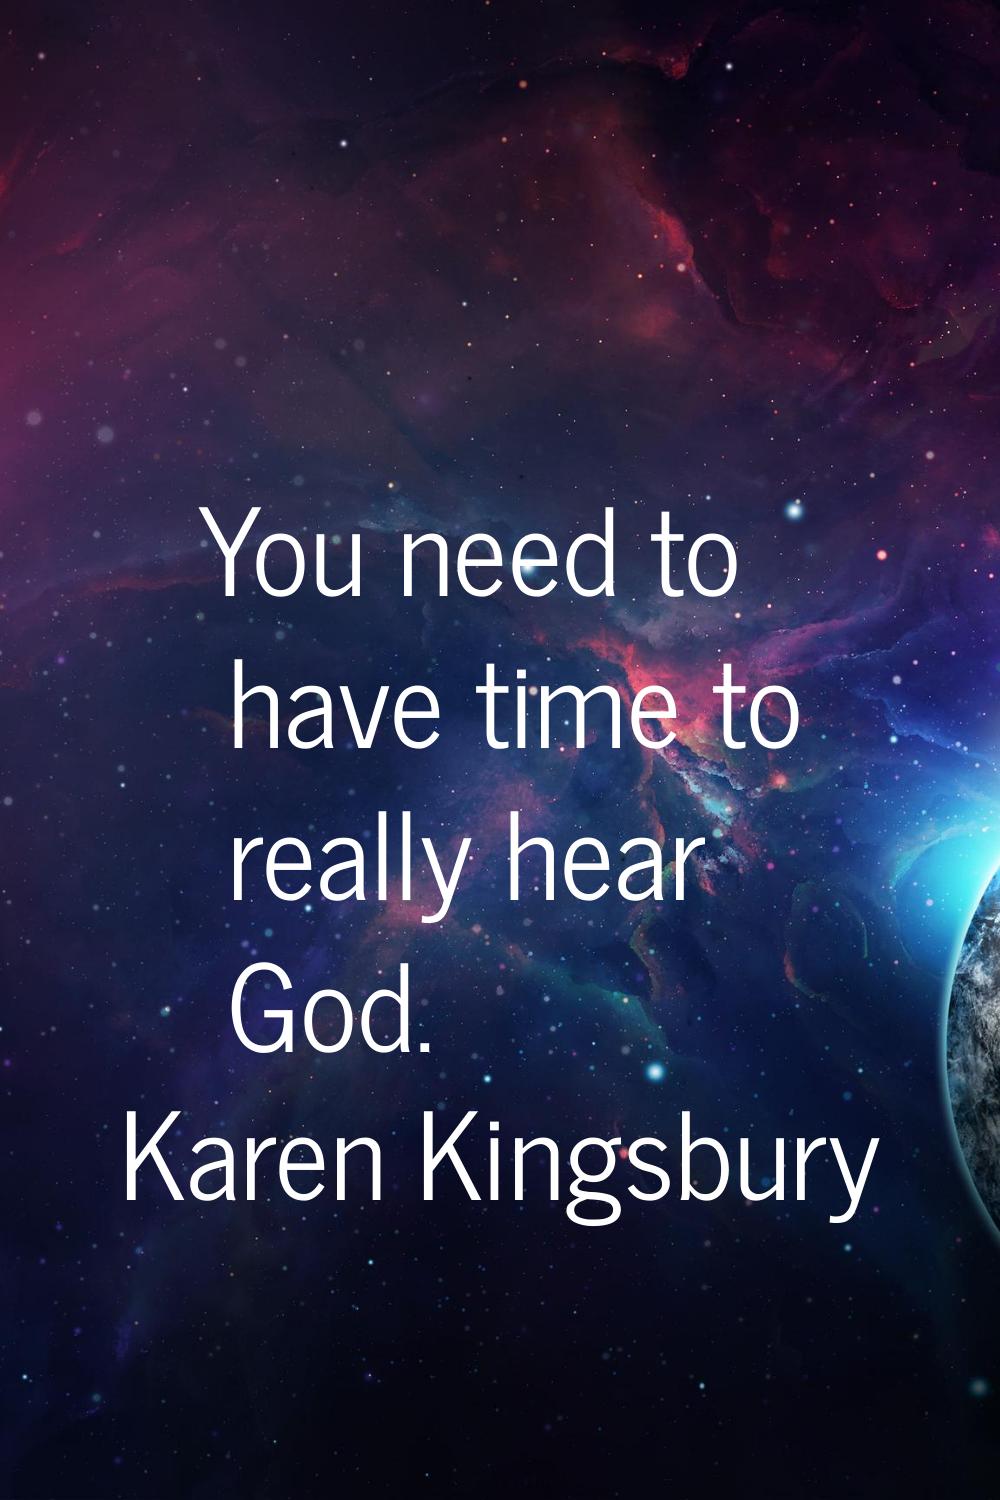 You need to have time to really hear God.